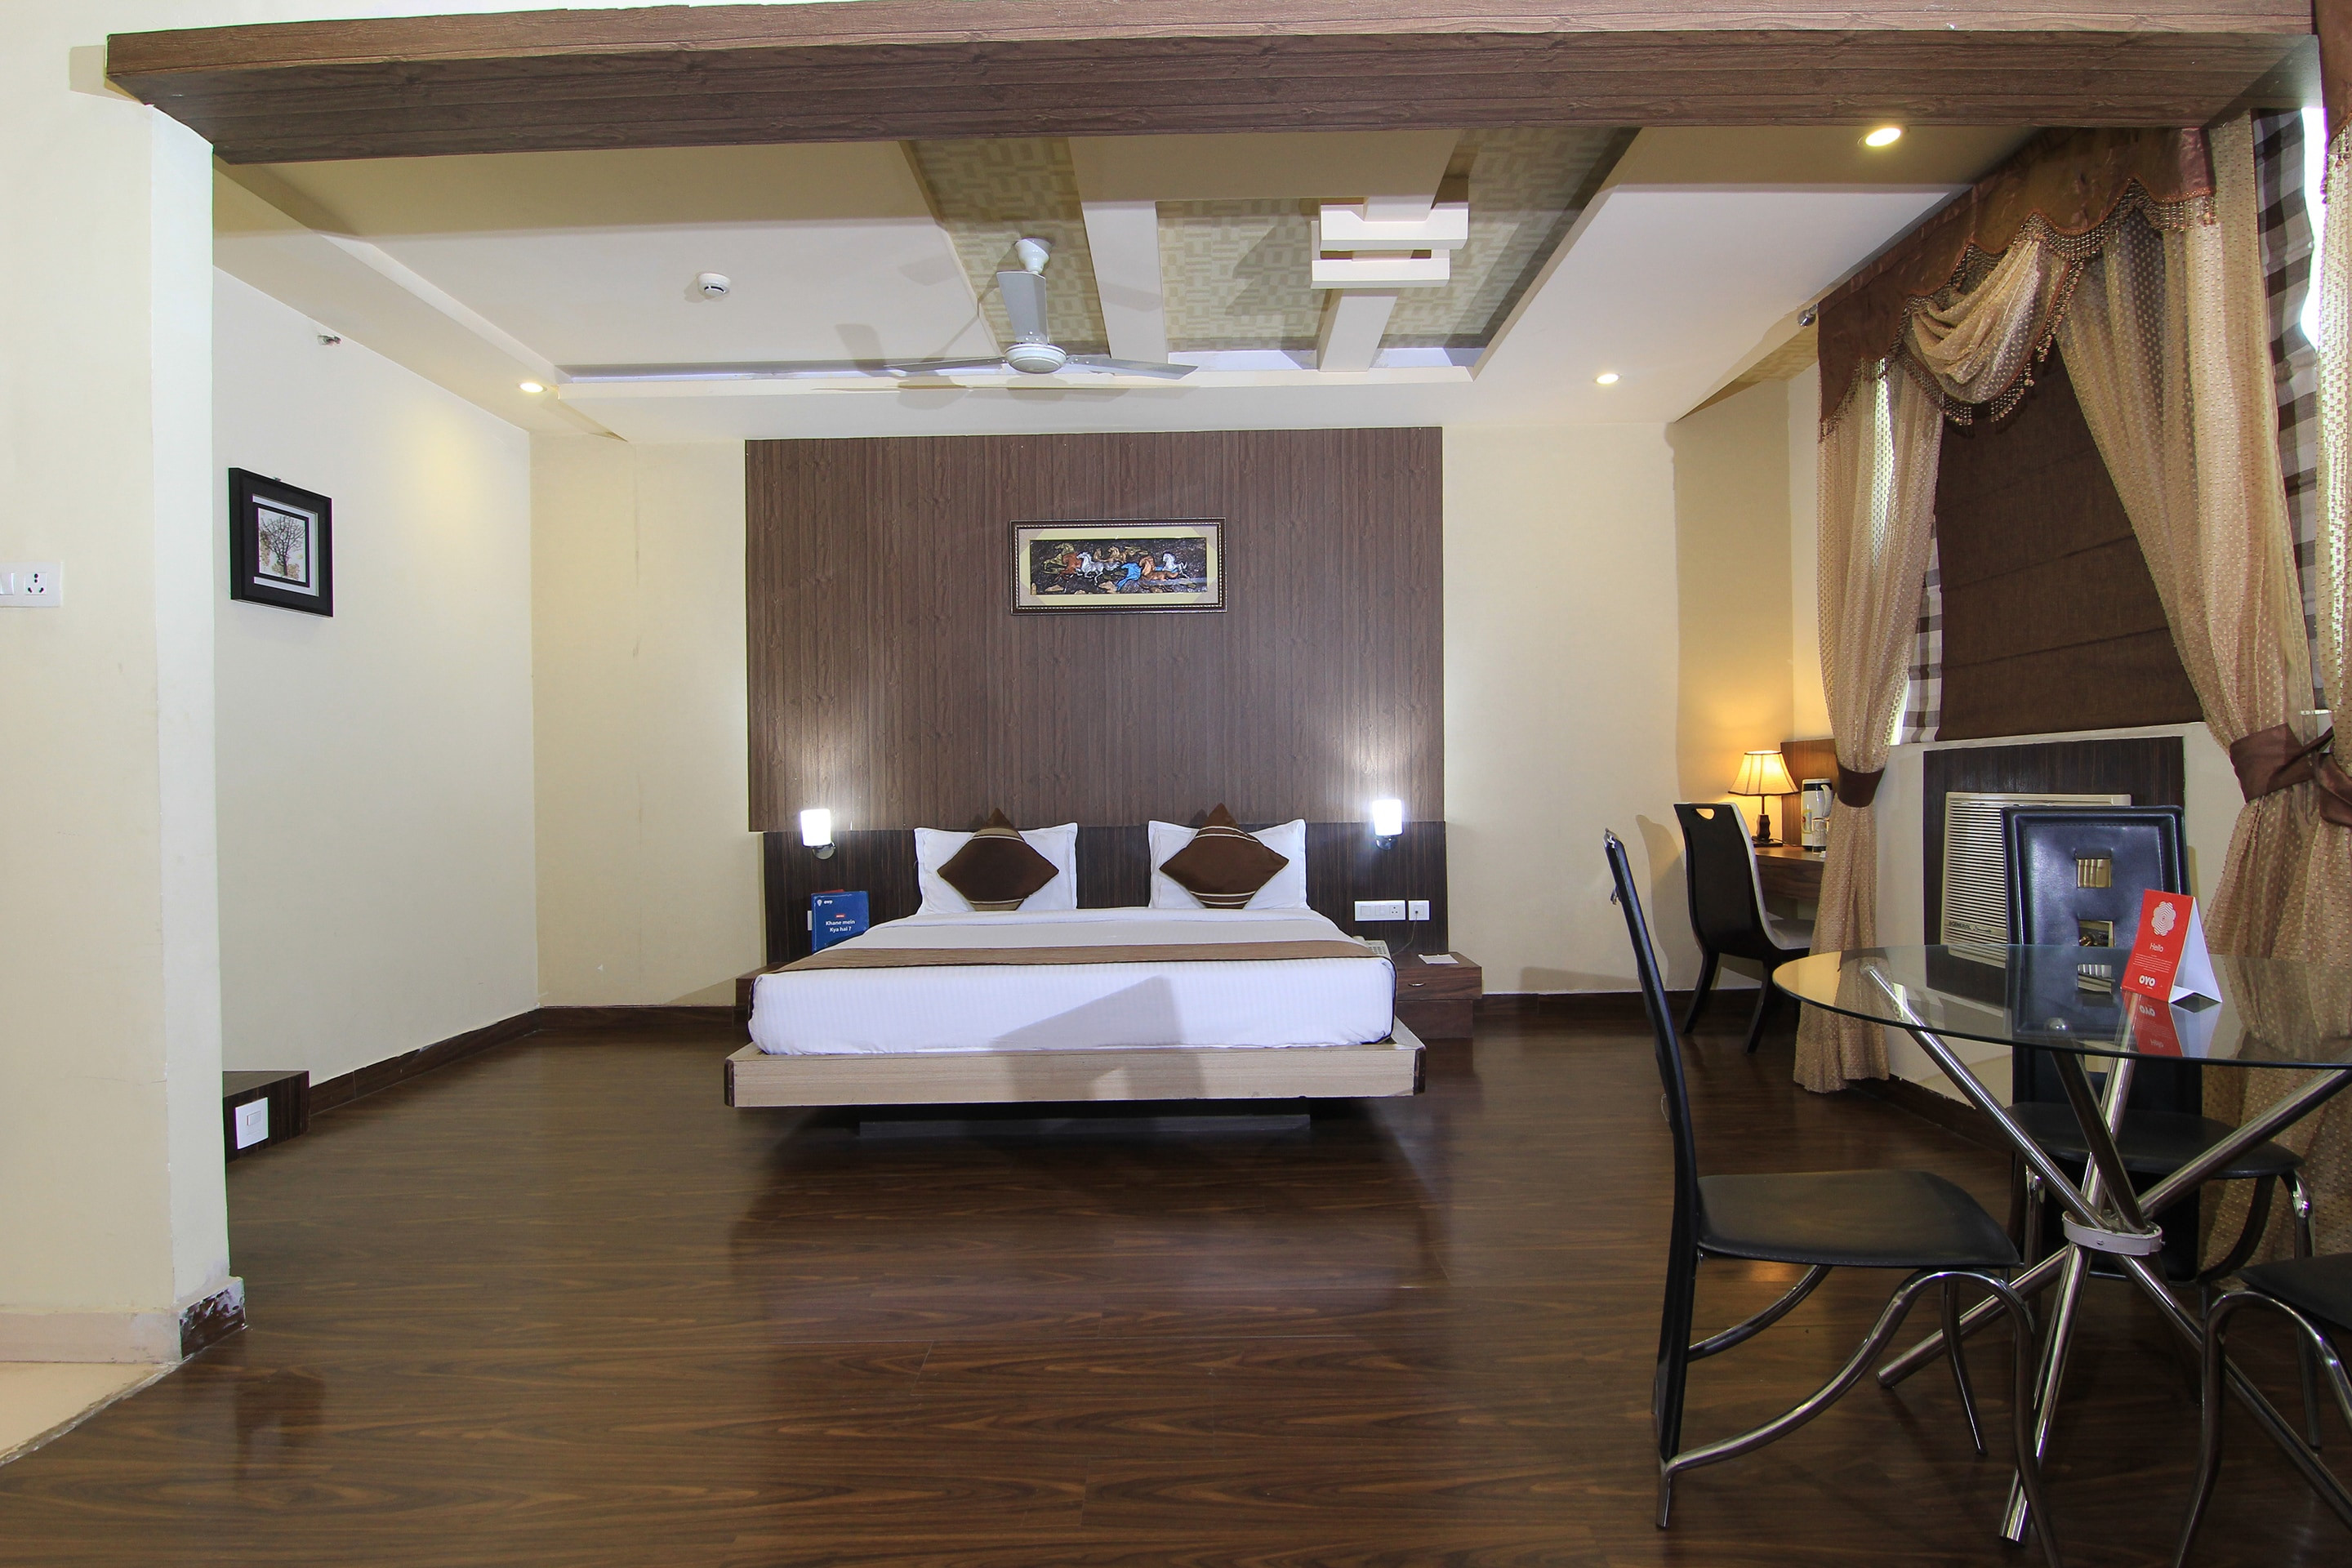 the hardwood flooring store burlington reviews of oyo 2136 hotel the continental lucknow lucknow hotel reviews intended for oyo 2136 hotel the continental lucknow lucknow hotel reviews photos offers oyo rooms